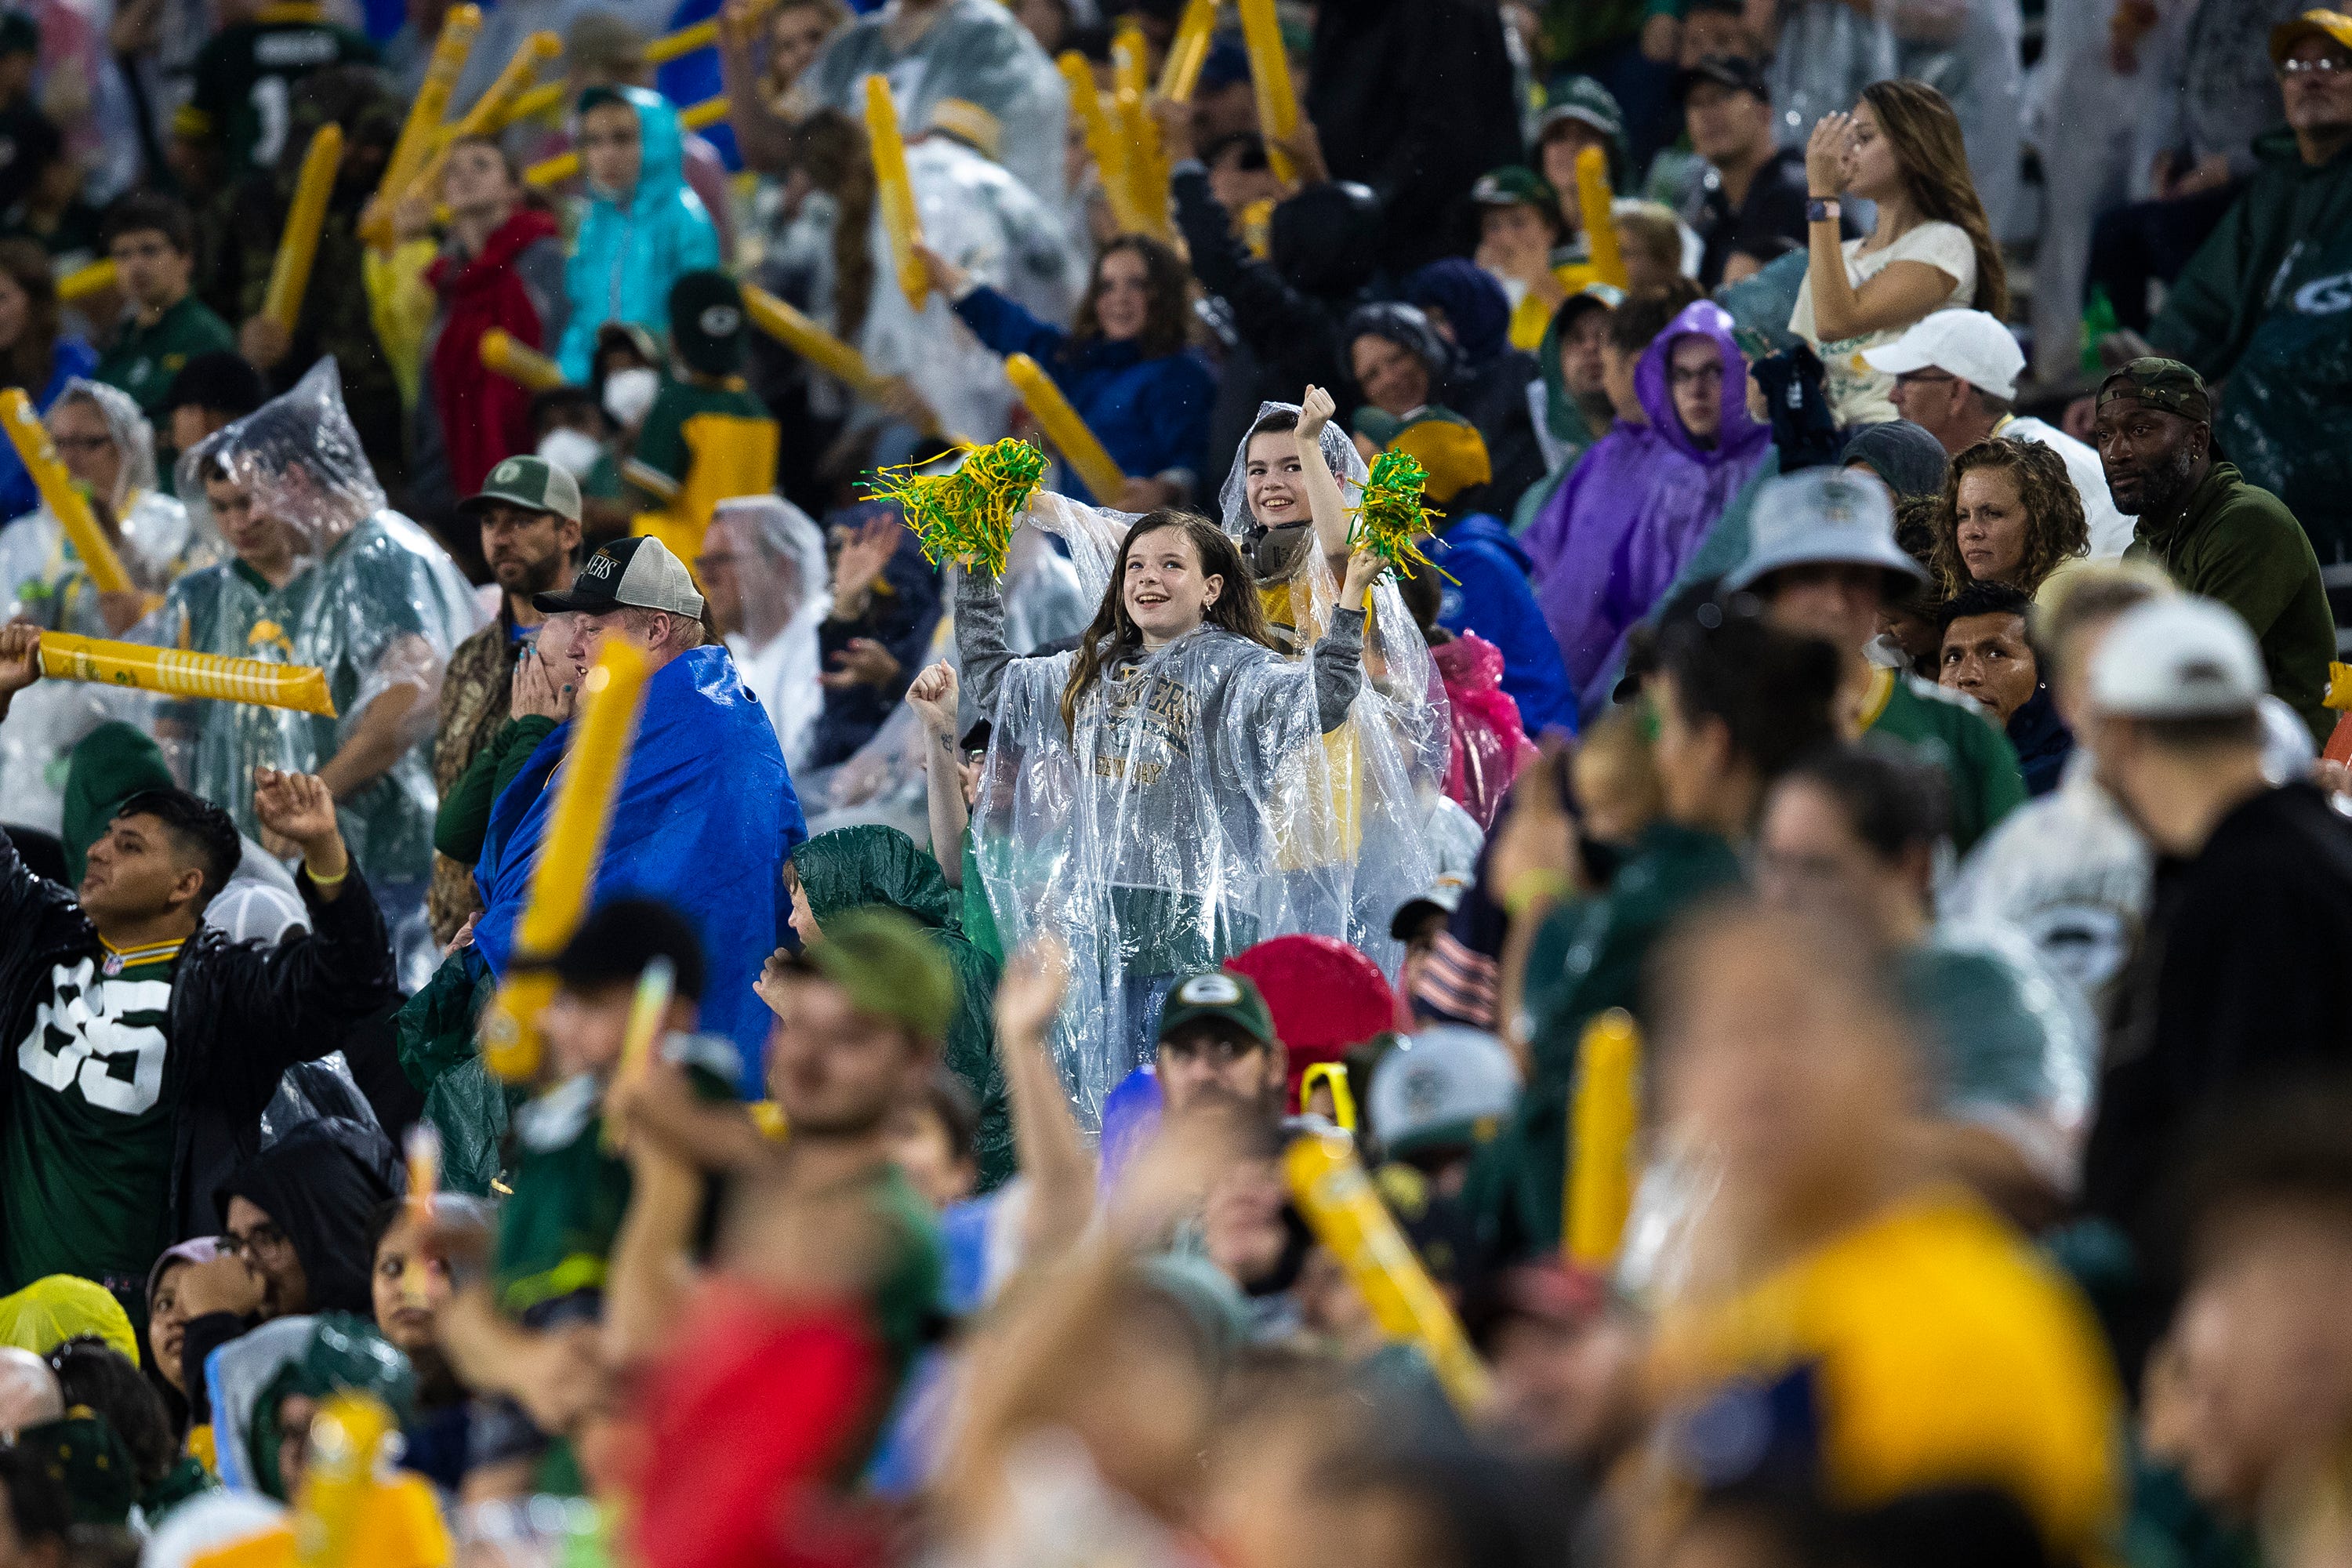 Fans cheer during Packers Family Night at Lambeau Field, Saturday, Aug. 7, 2021, in Green Bay, Wis. Samantha Madar/USA TODAY NETWORK-Wisconsin